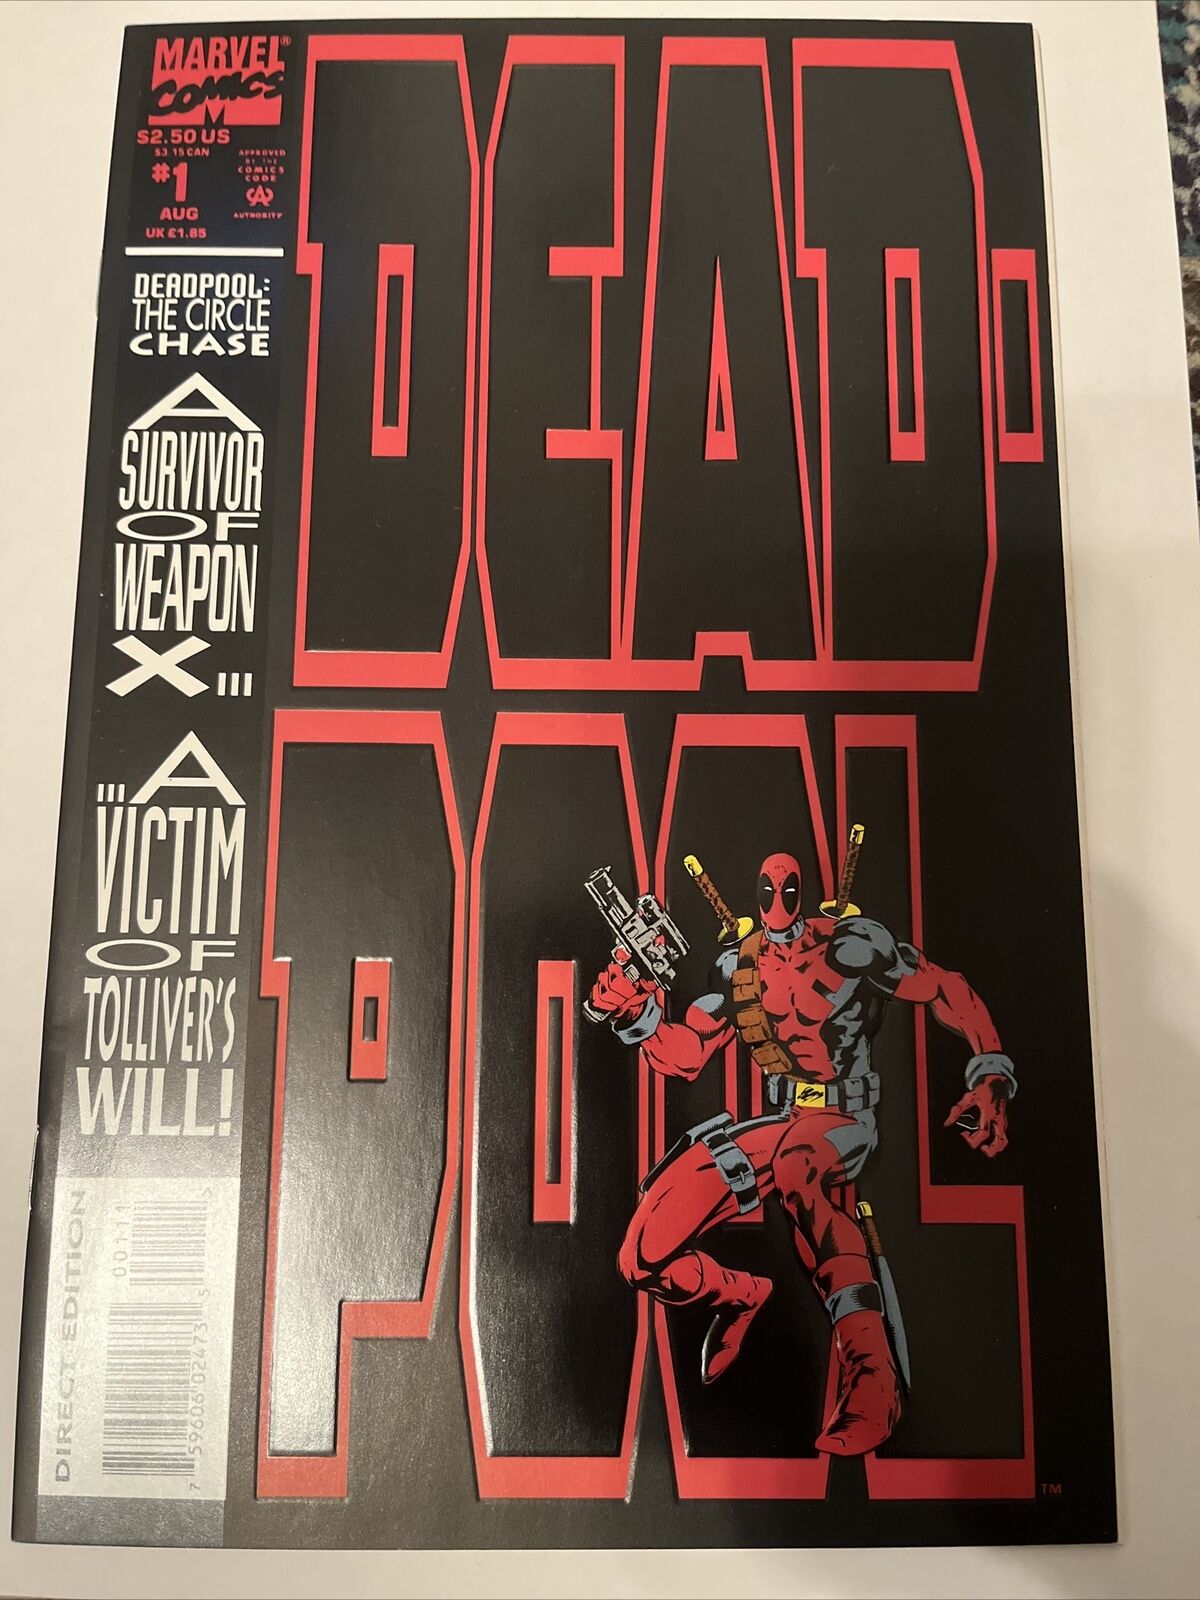 Deadpool: The Circle Chase Issue #1  1993 Marvel Comics